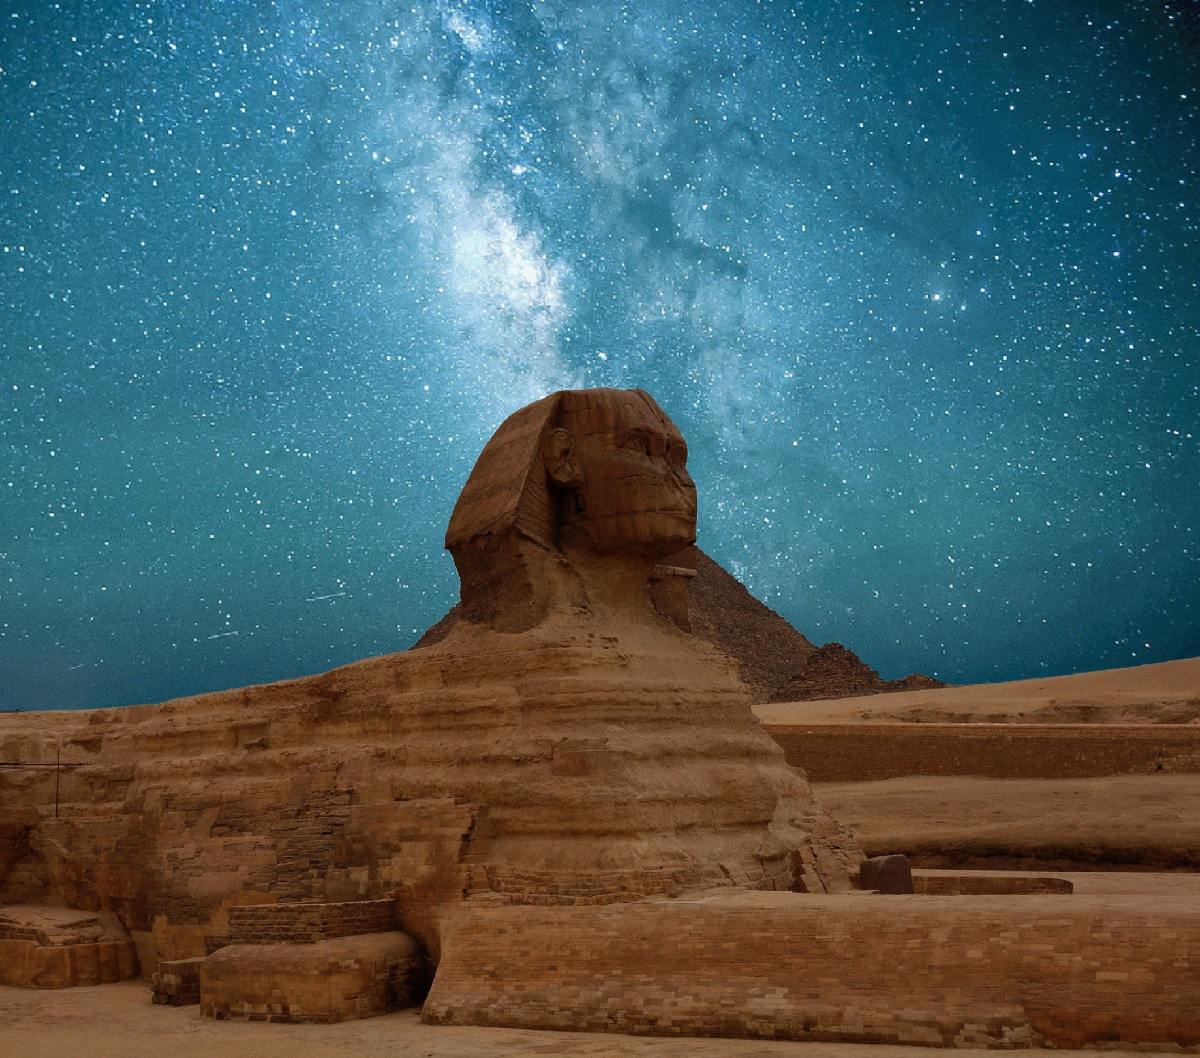 The Sphinx in the night sky.